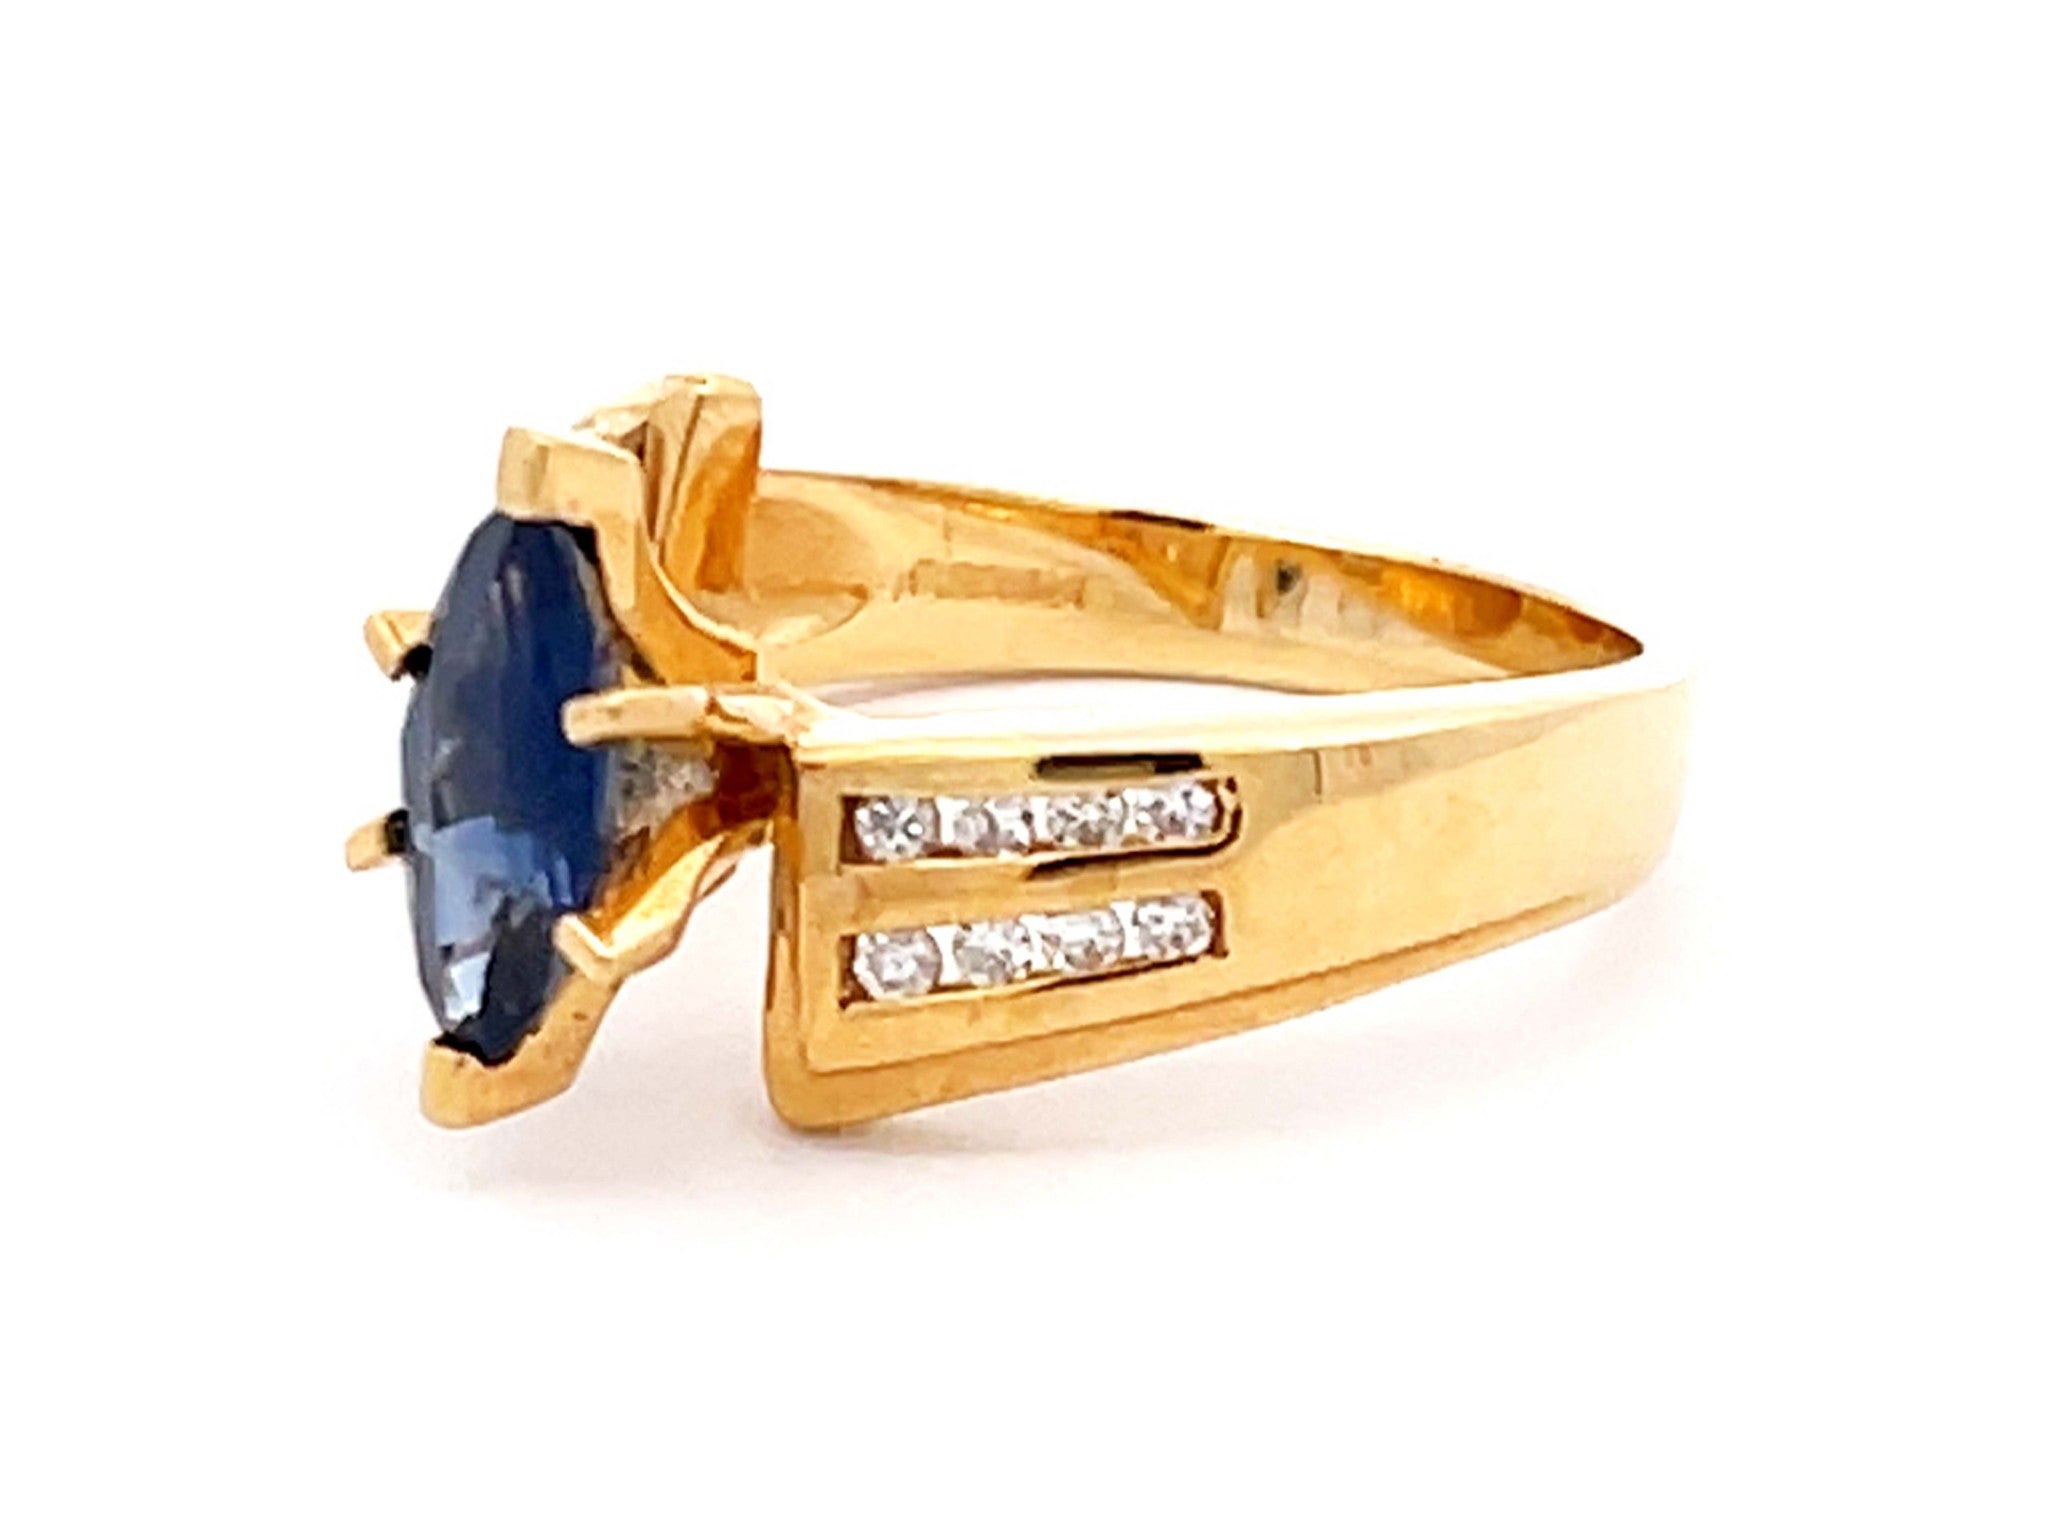 Vintage Marquise Blue Sapphire and Diamond Ring in 14k Yellow Gold